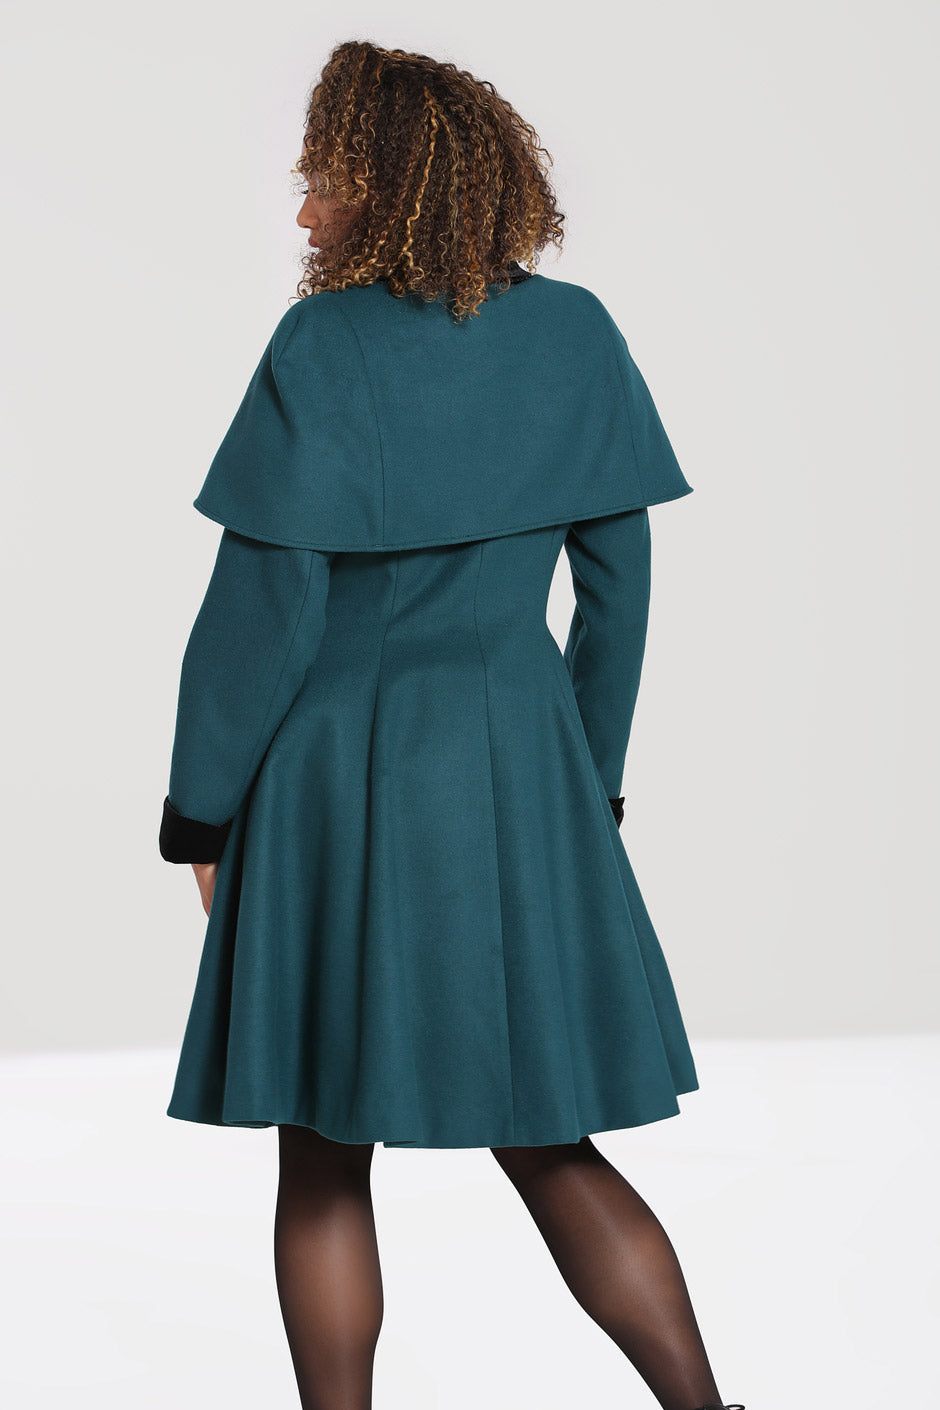 Model showing off the back of her green vintage coat and matching cape